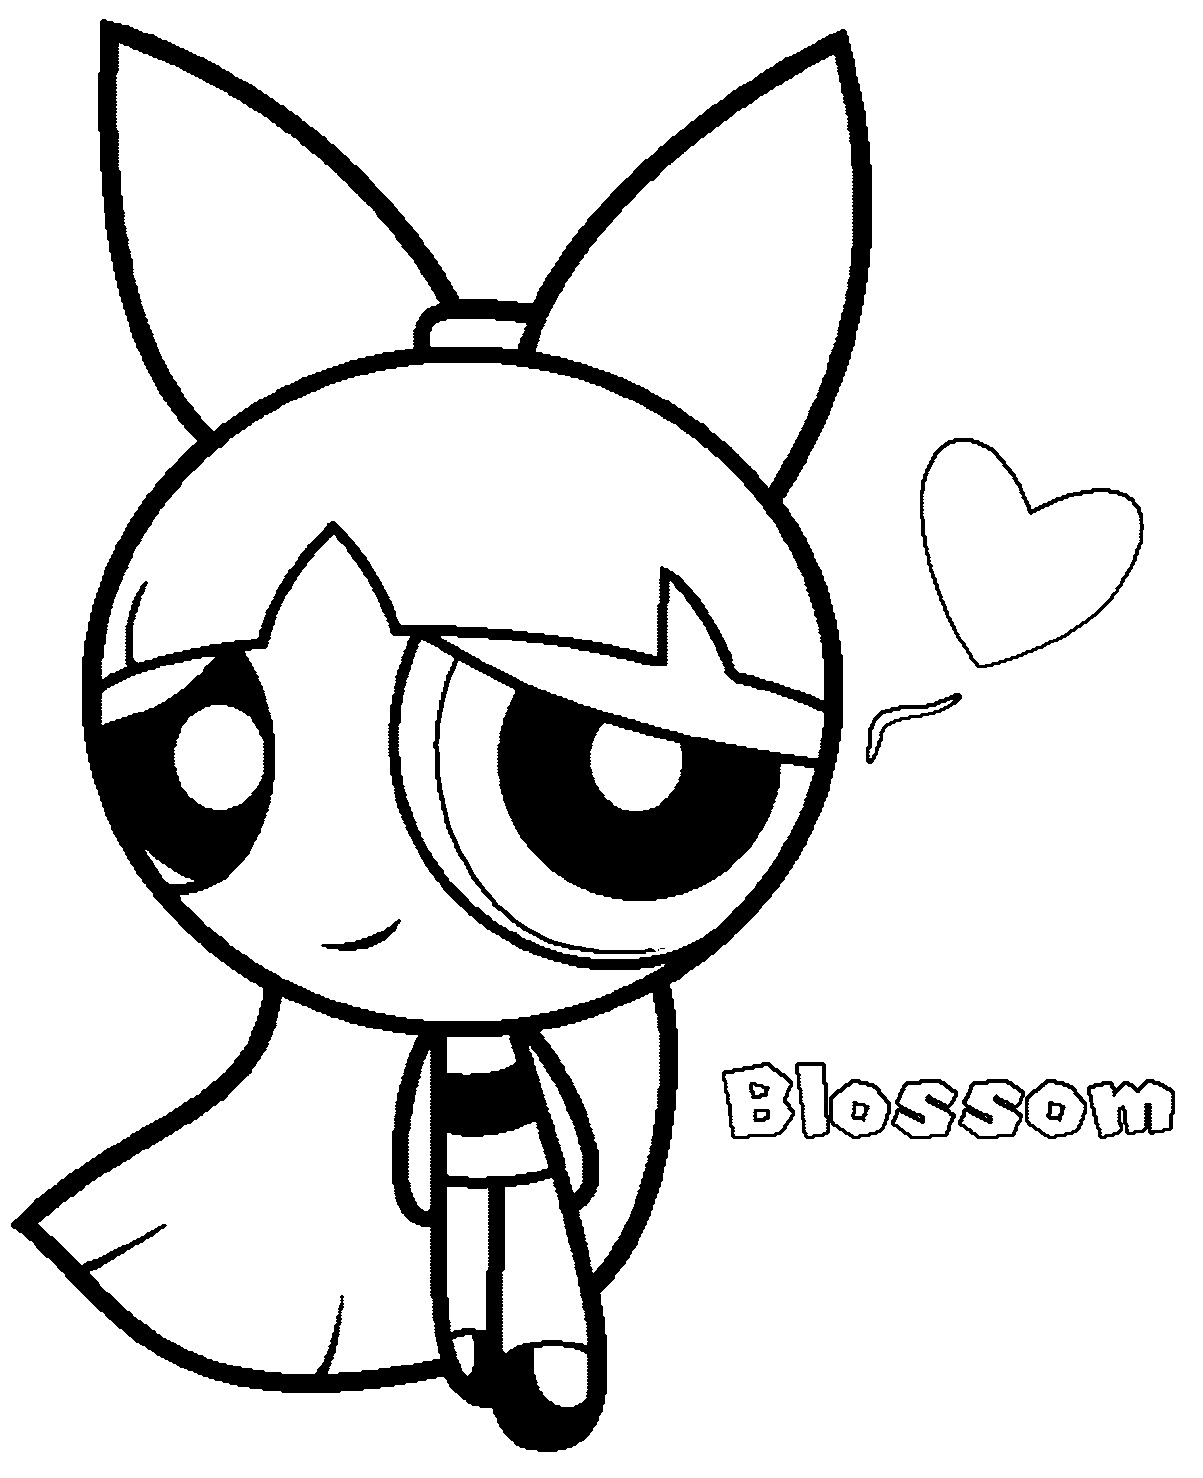 Powerpuff Girls Blossom Coloring Pages
 Blossom And Rabbit Coloring Pages Coloring Home